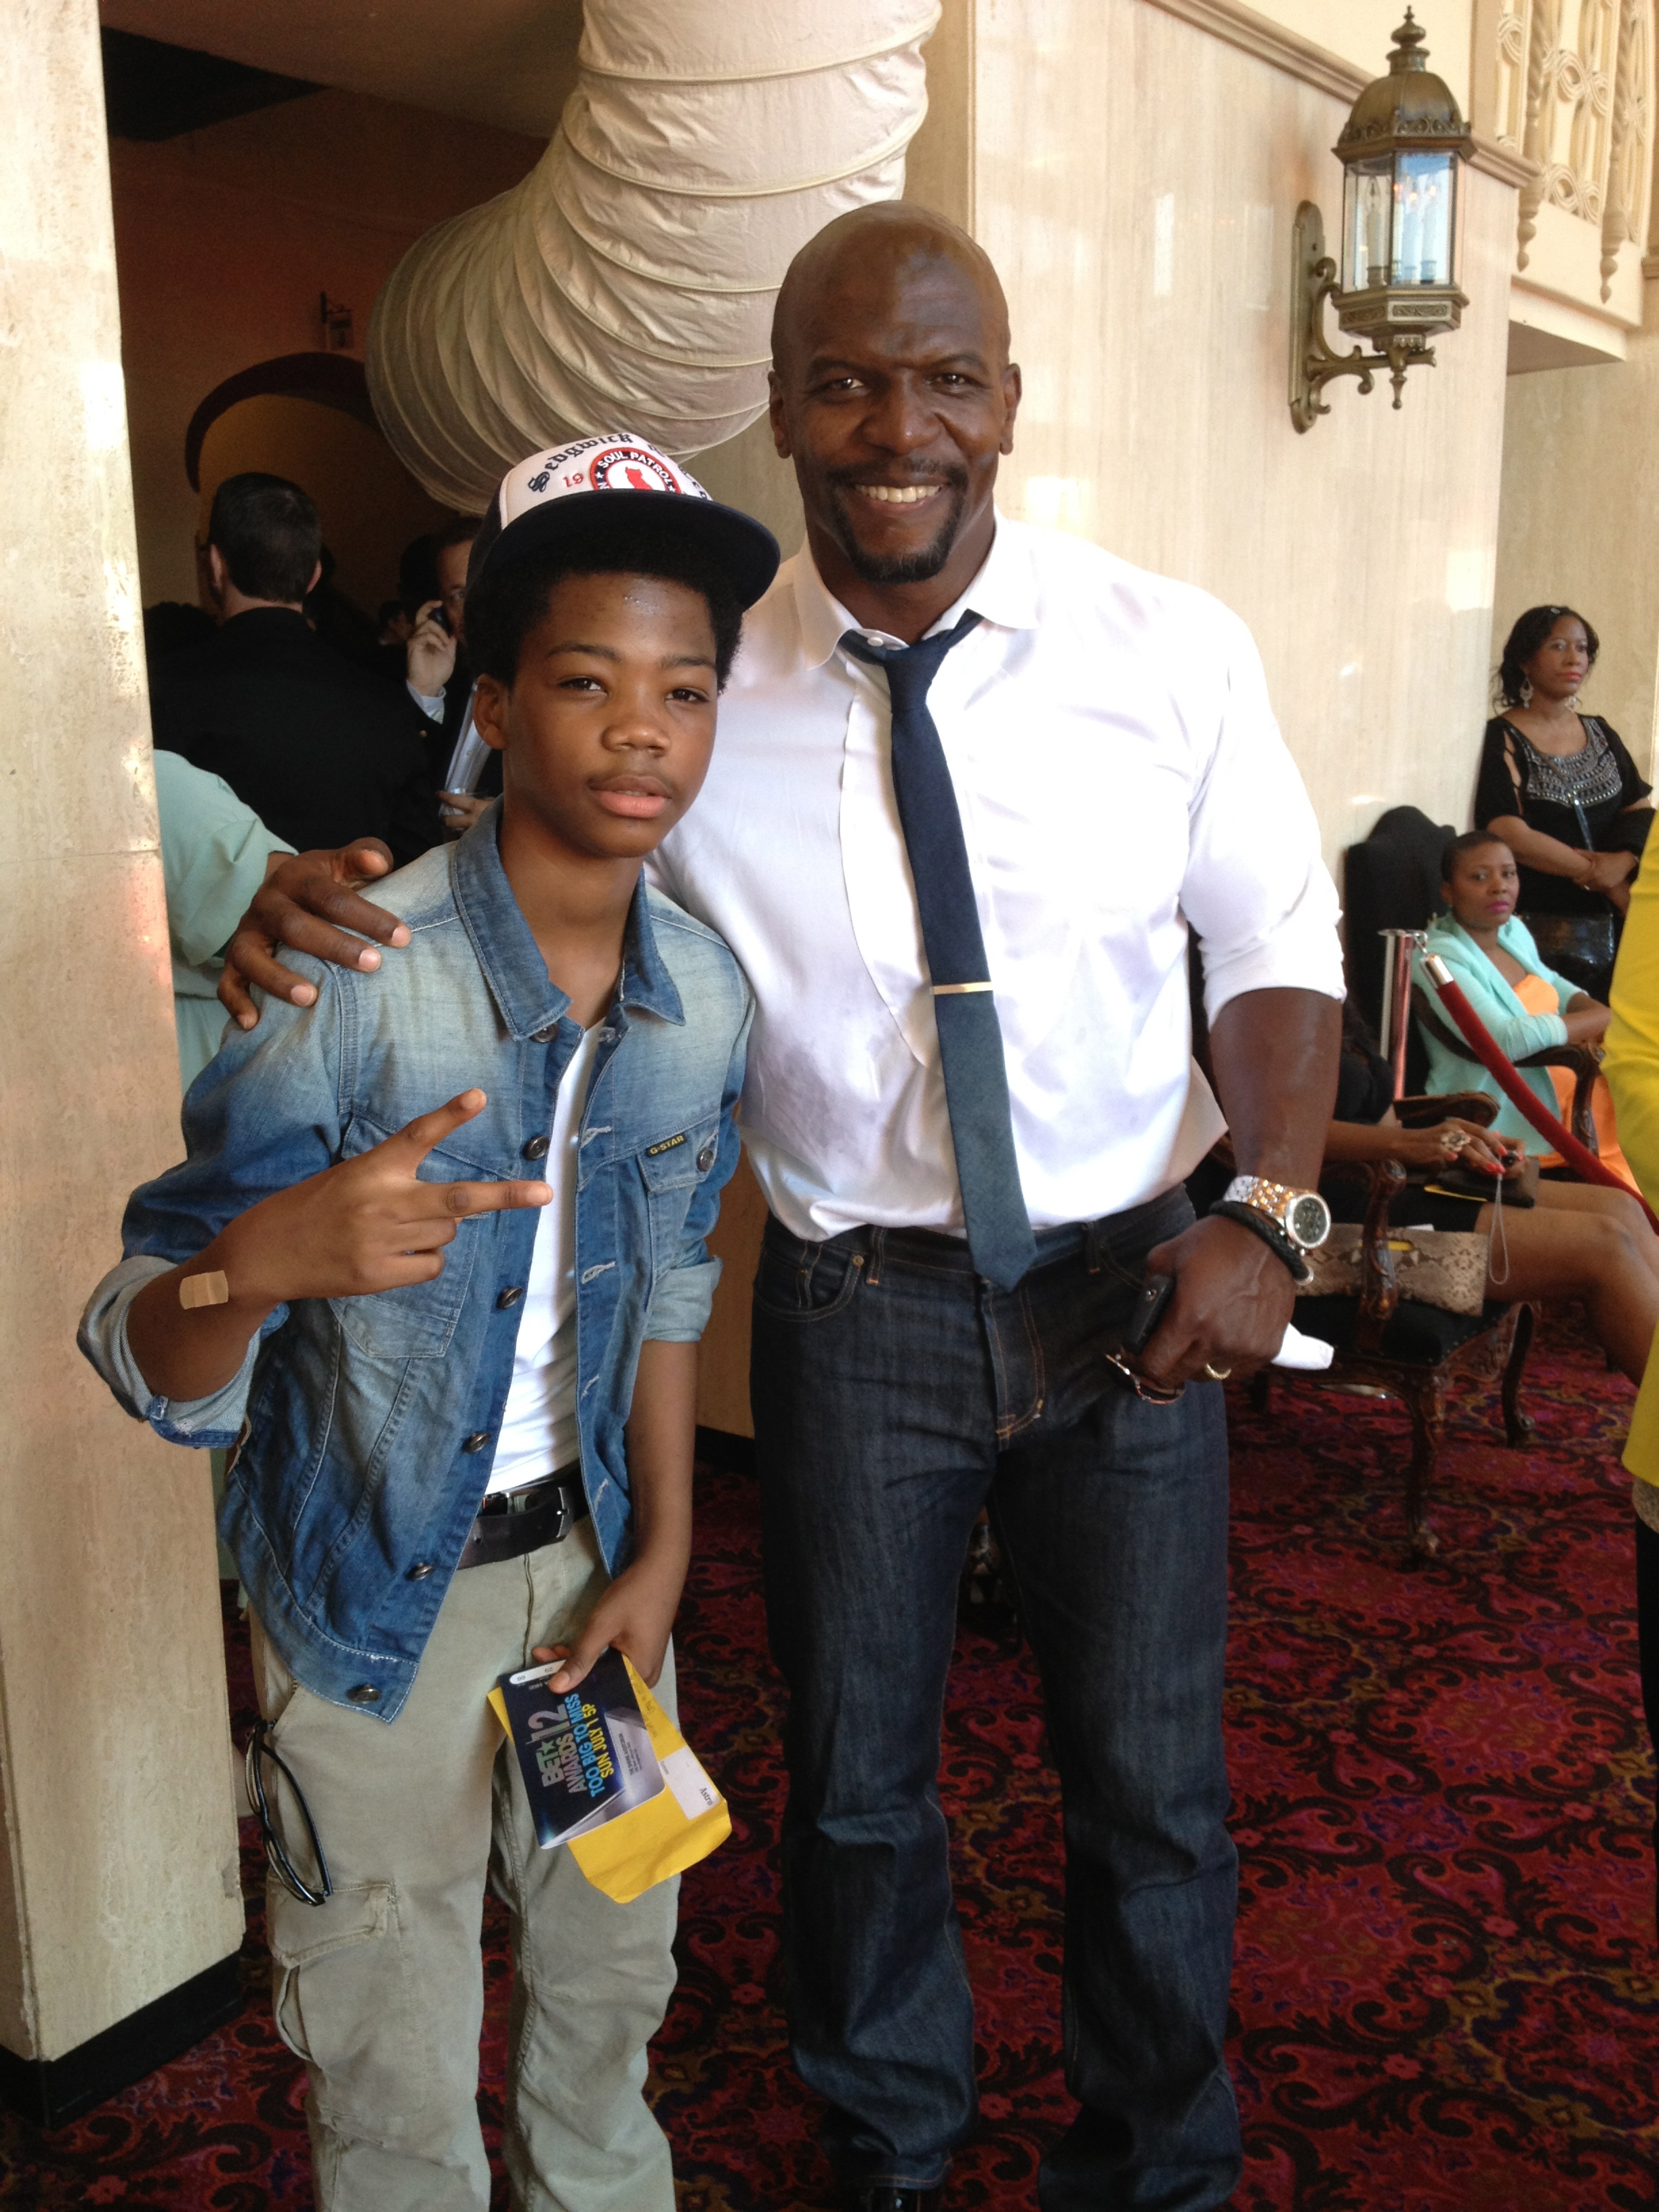 Astro and Terry Crews at the 2012 BET Awards.